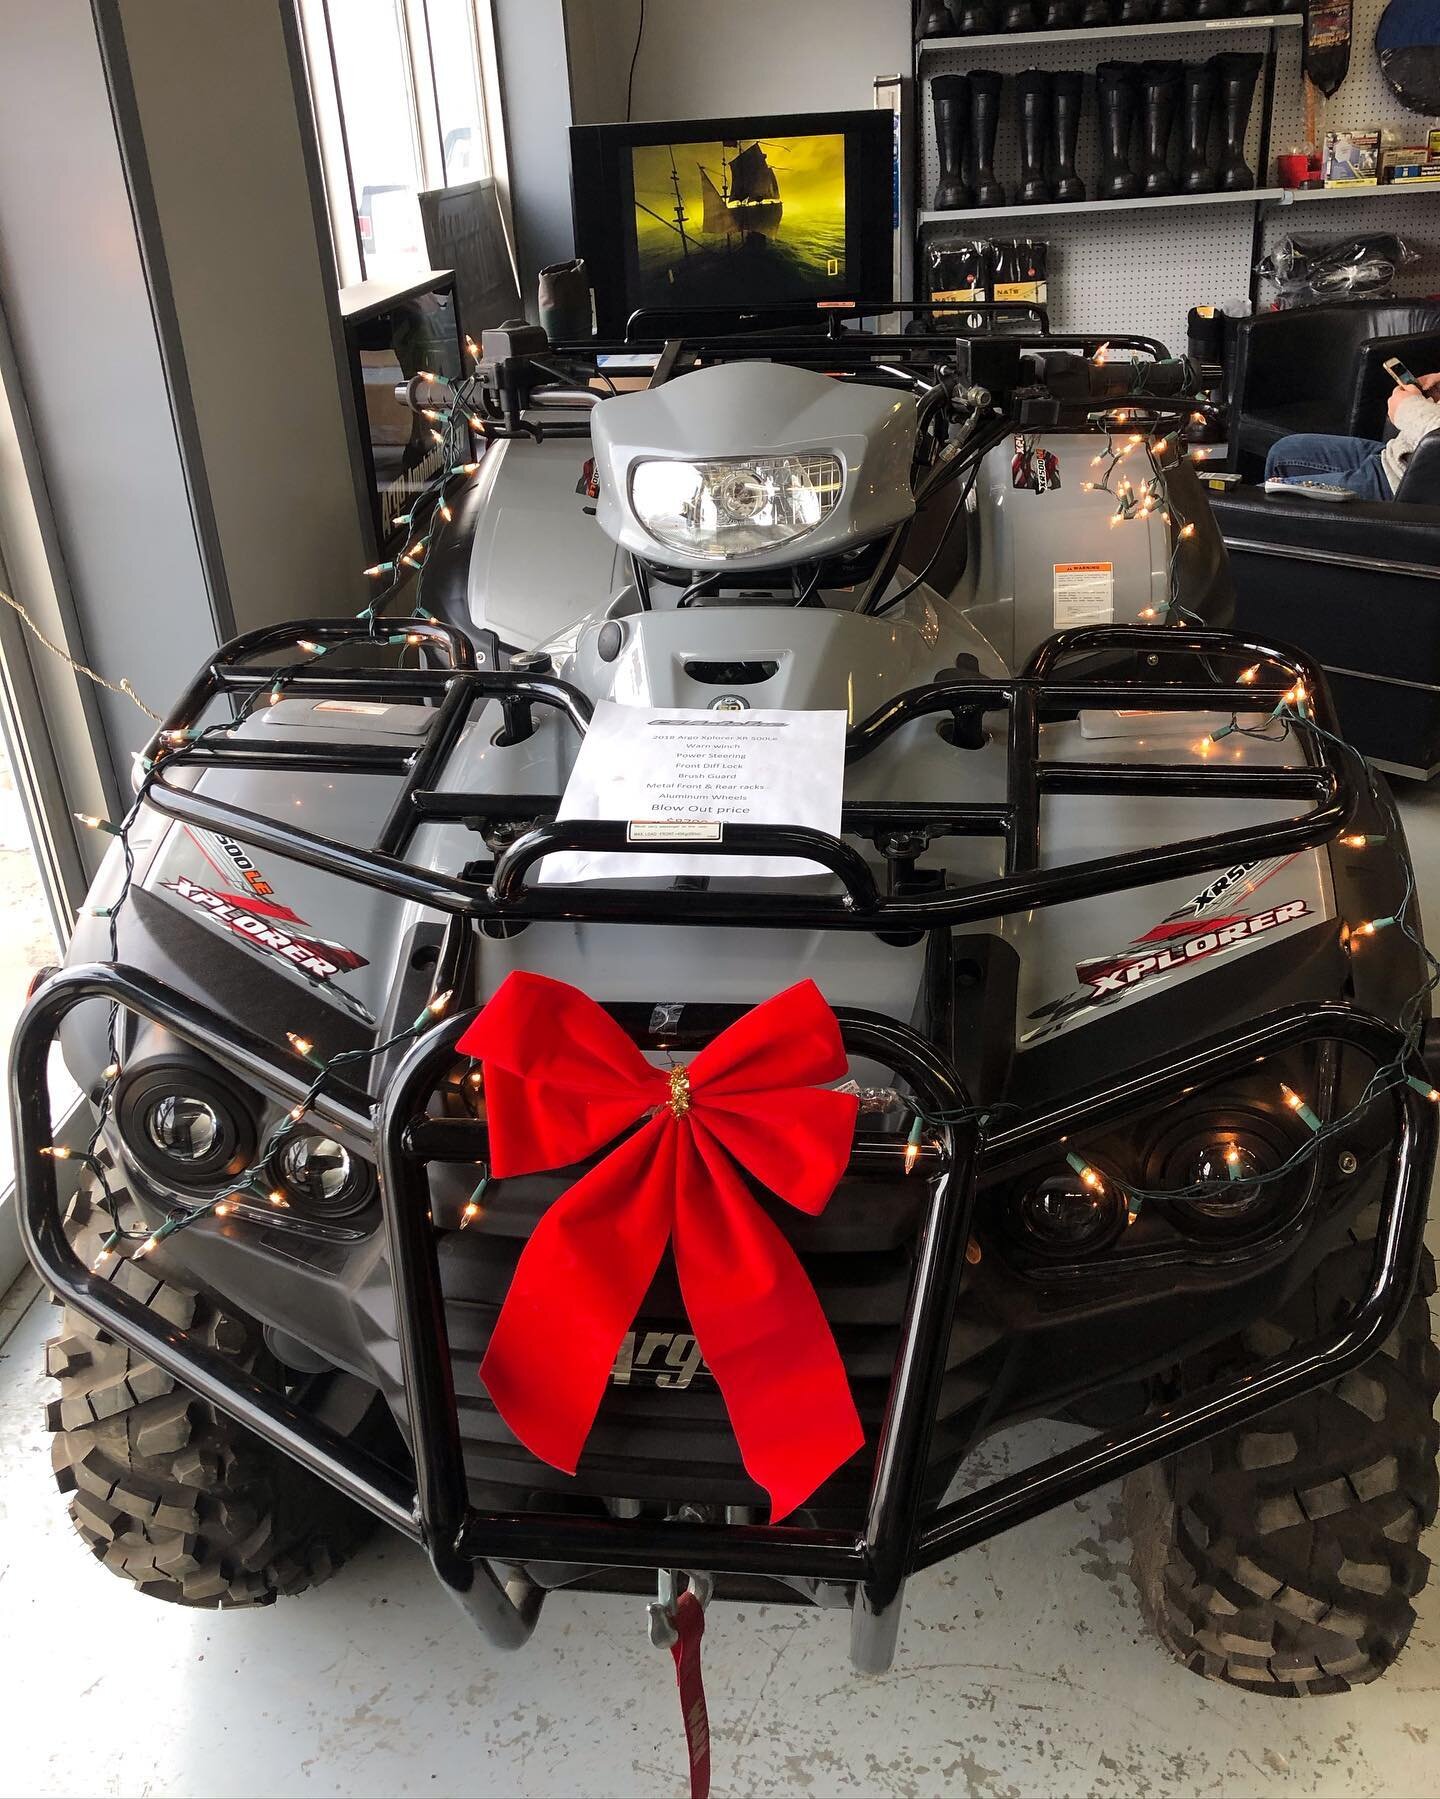 CHRISTMAS SPECIAL!!🎄

LAST ONE LEFT SO GRAB IT BEFORE IT&rsquo;S GONE‼️

Additional $500 OFF of already low price of $8700 now $8200 +GST &amp; 3 year WARRANTY! 🎁

Come into CS Auto in Plamondon to get yourself a new ride💨